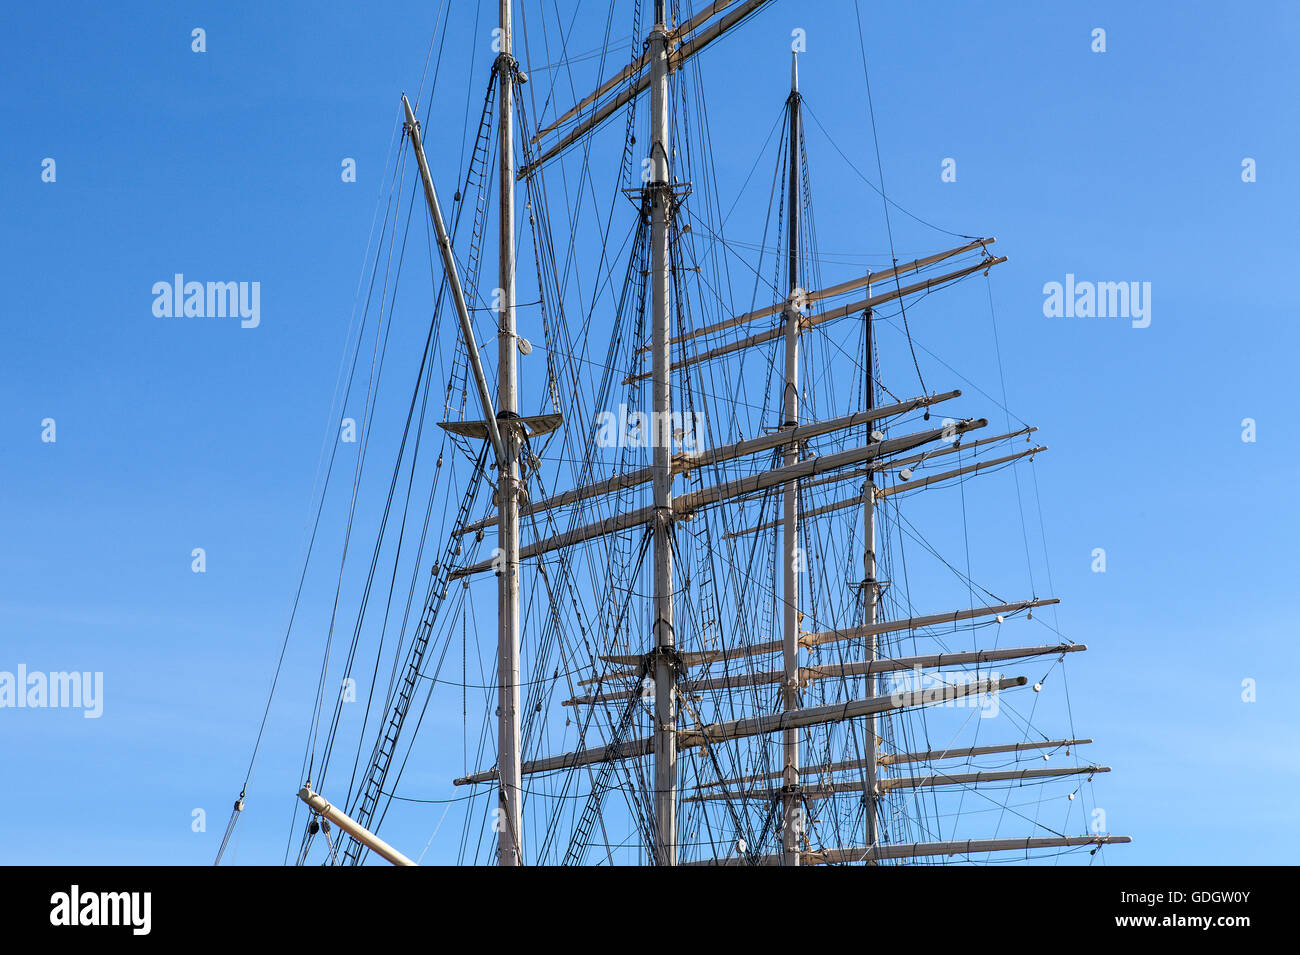 The masts and rigging on a full-rigged ship. Sky and some visible clouds. Stock Photo